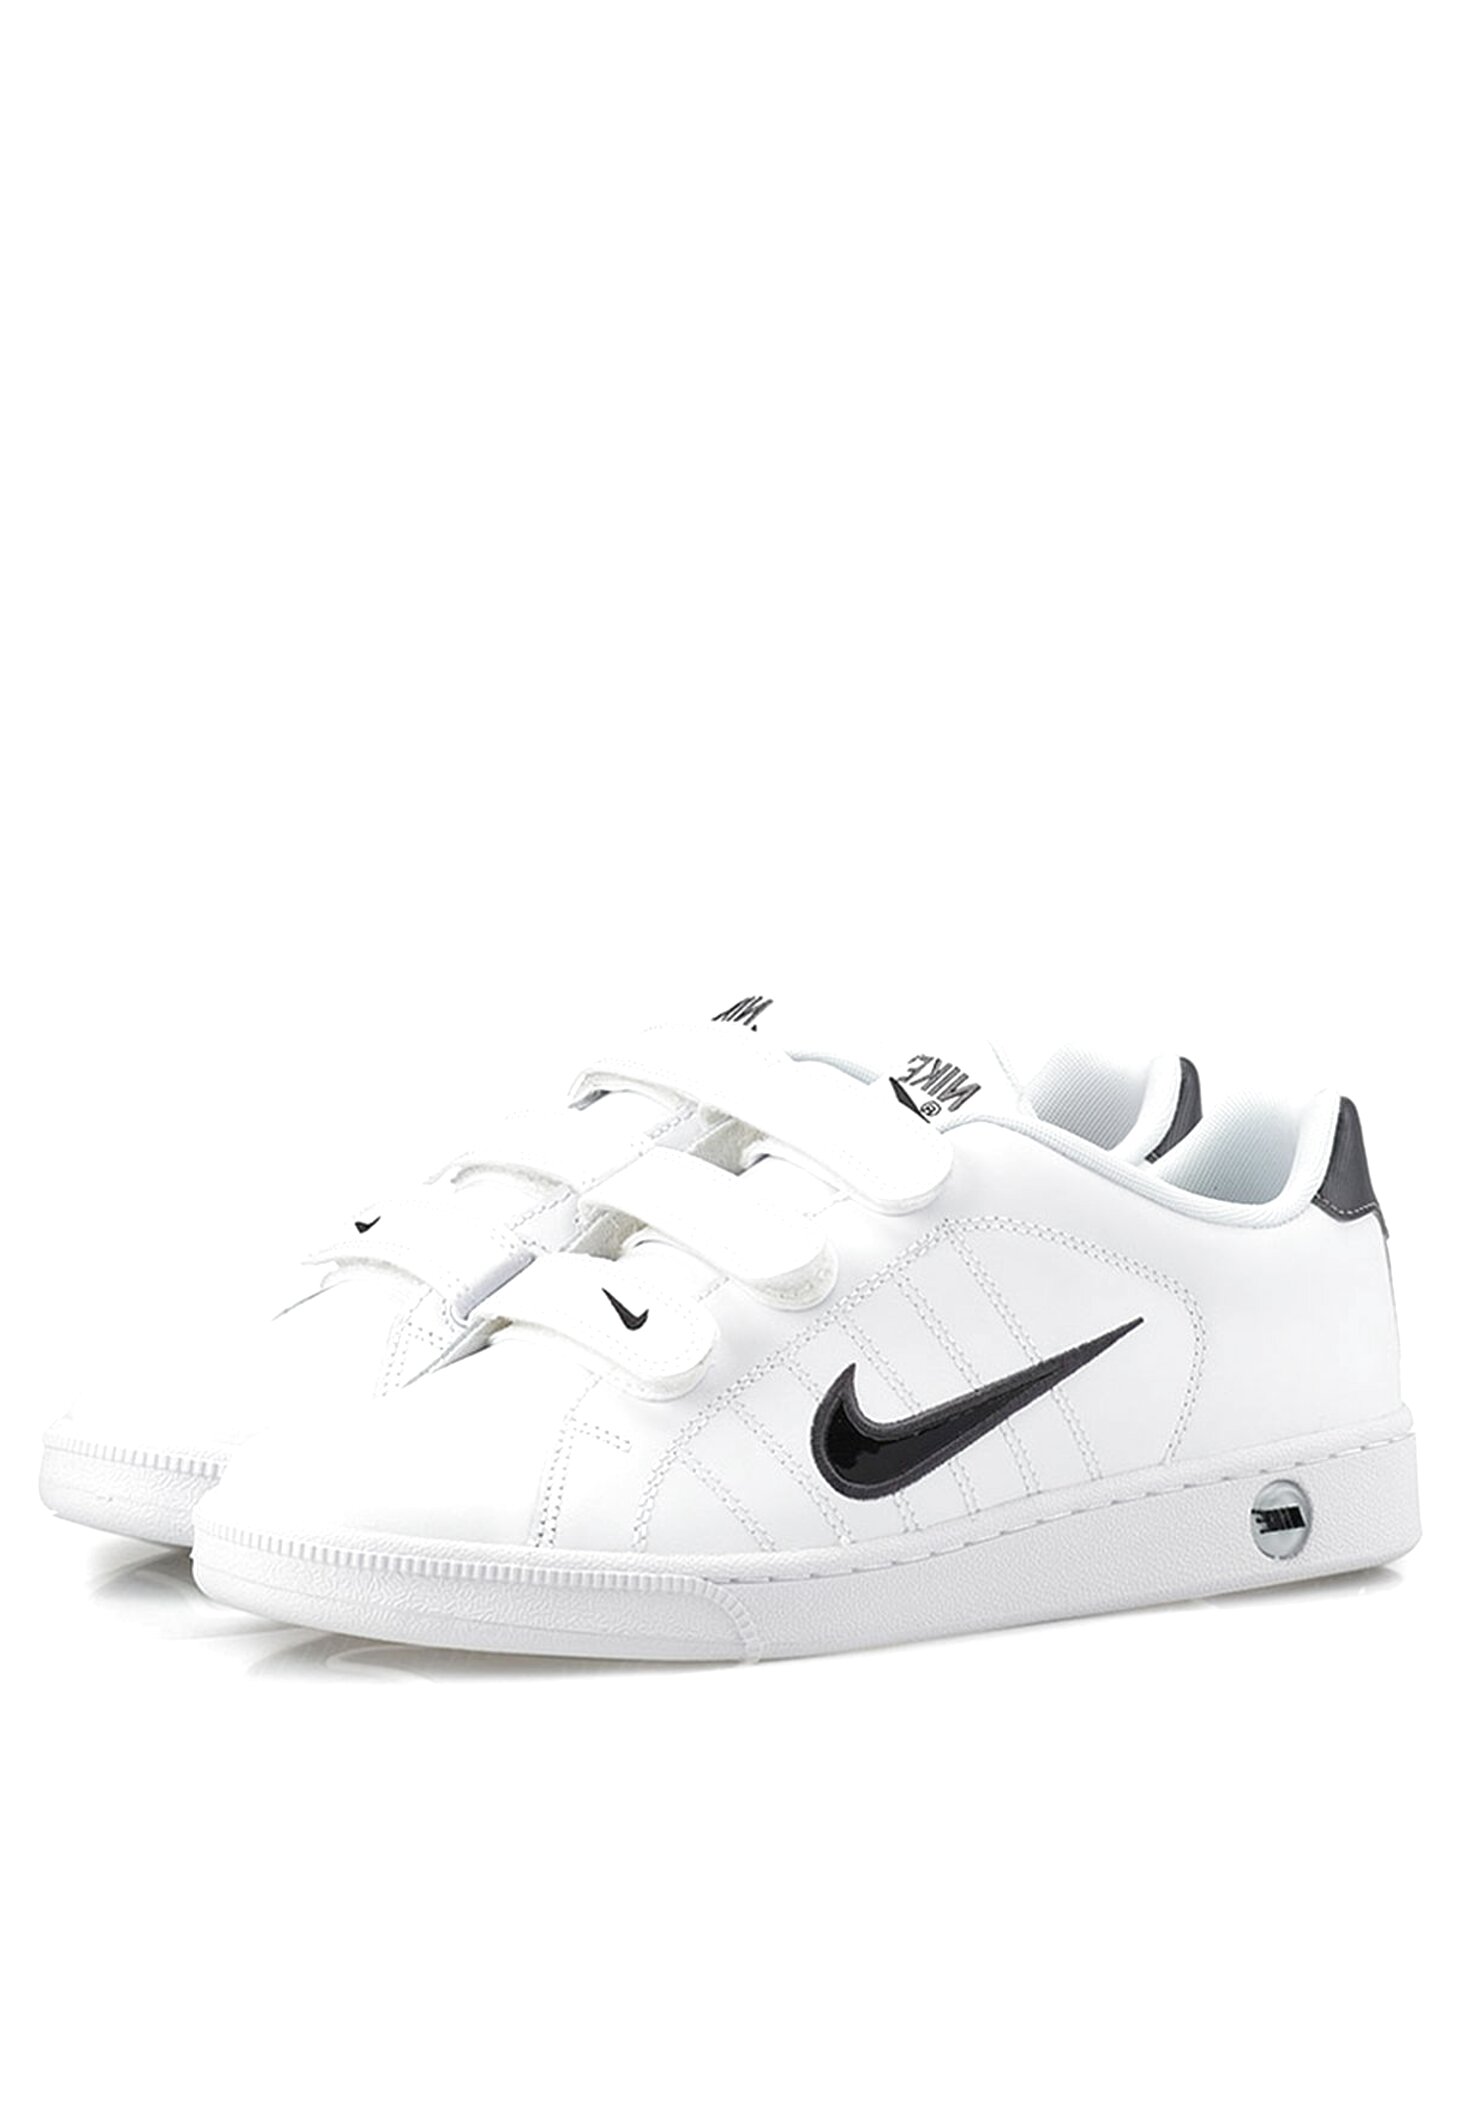 nike court tradition 2 mens trainers